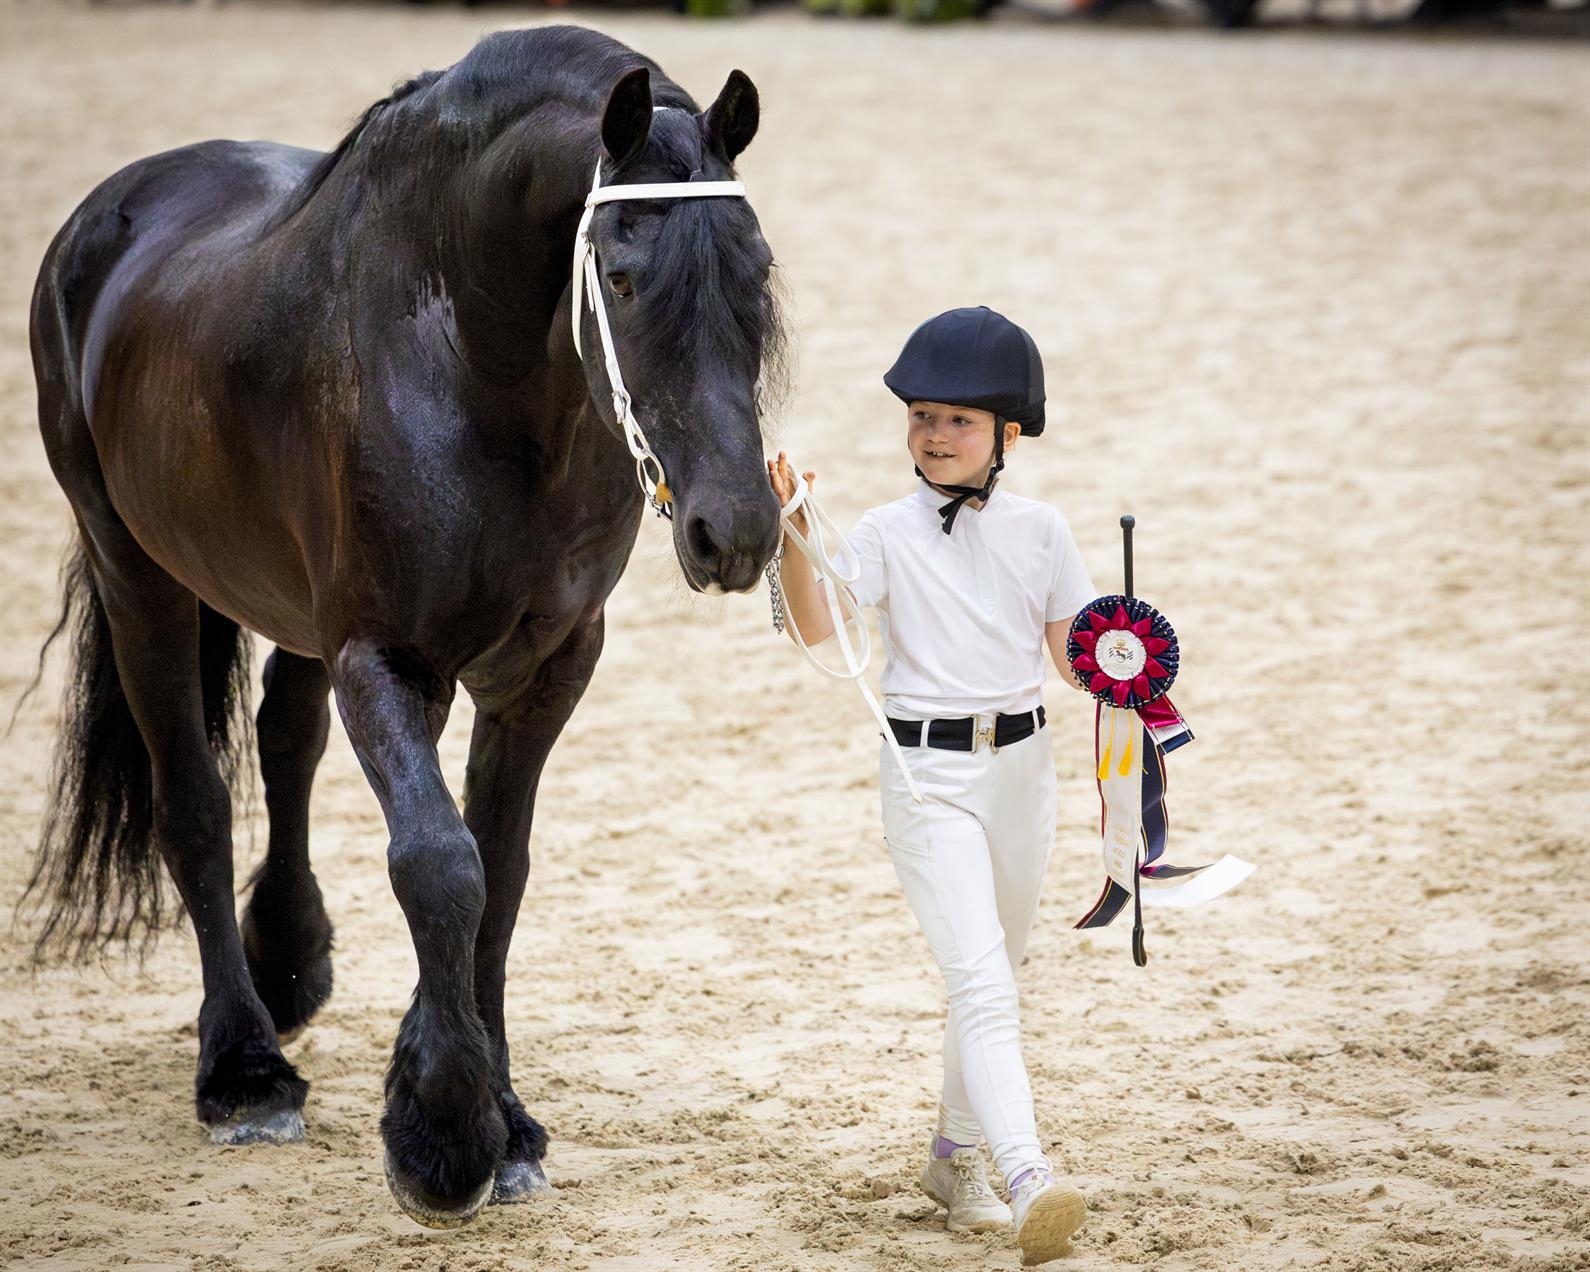 A Friesian being led by a young girl holding a ribbon